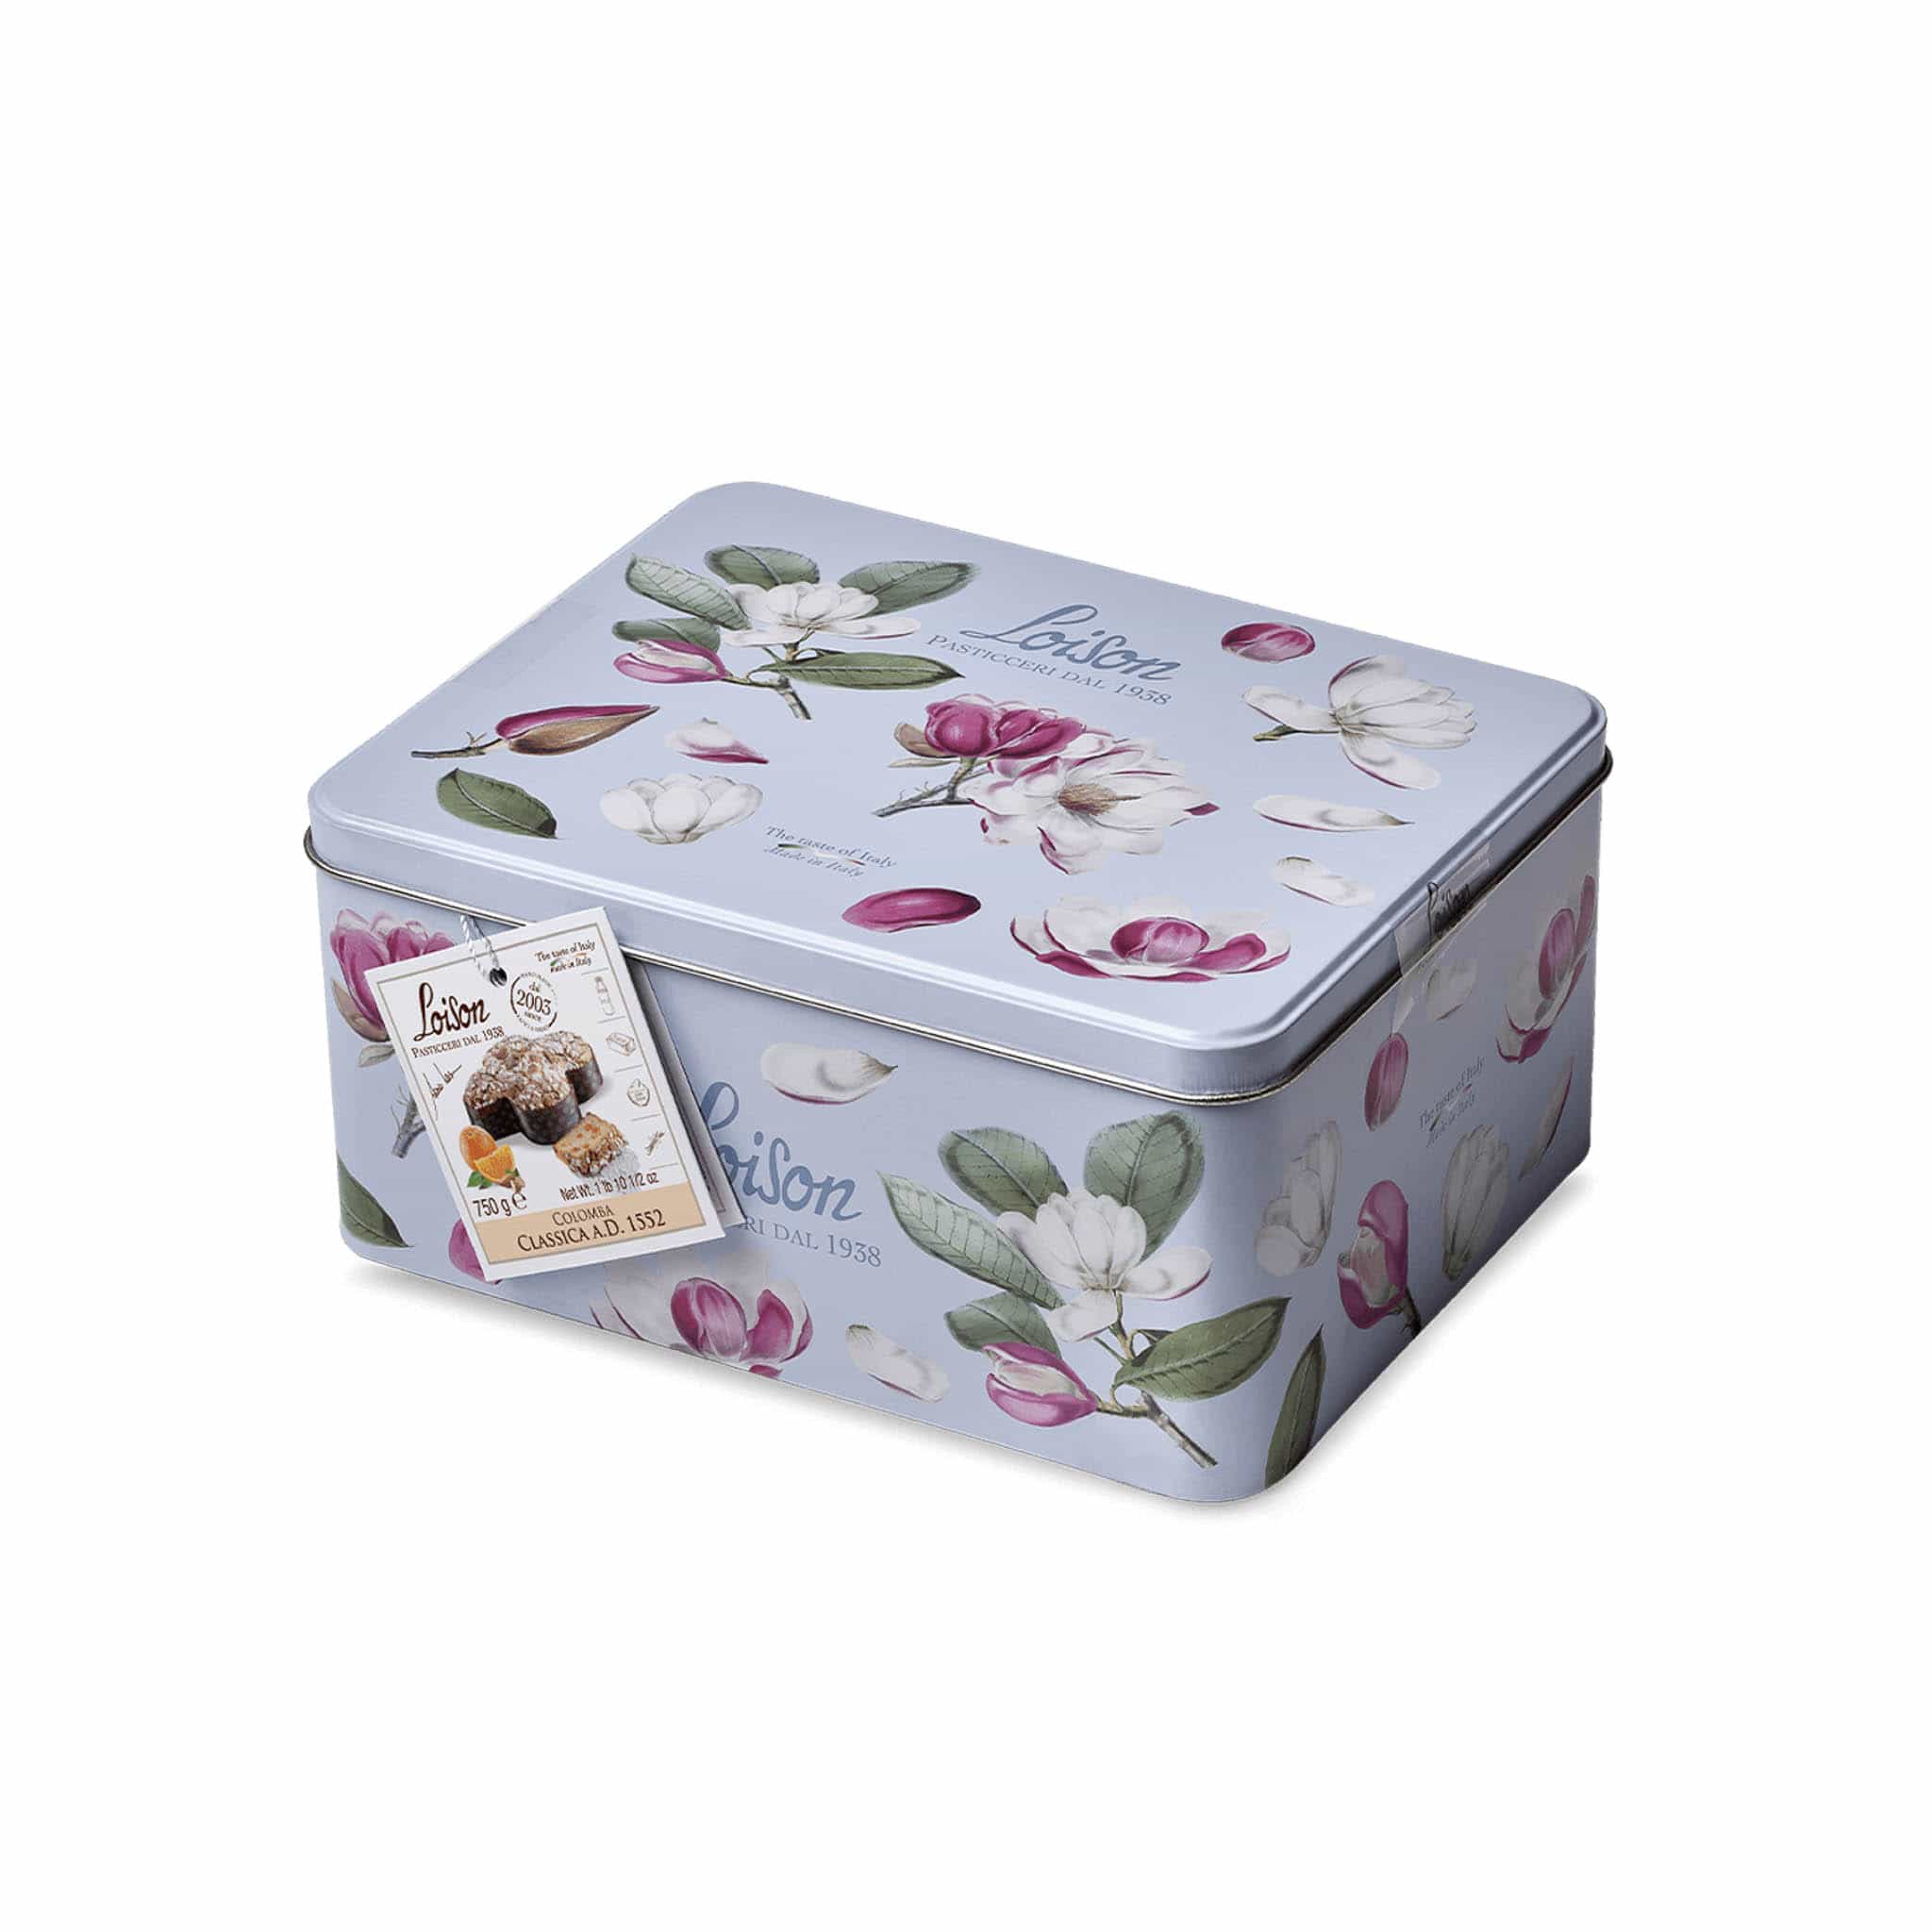 Loison Classic Colomba in Tin